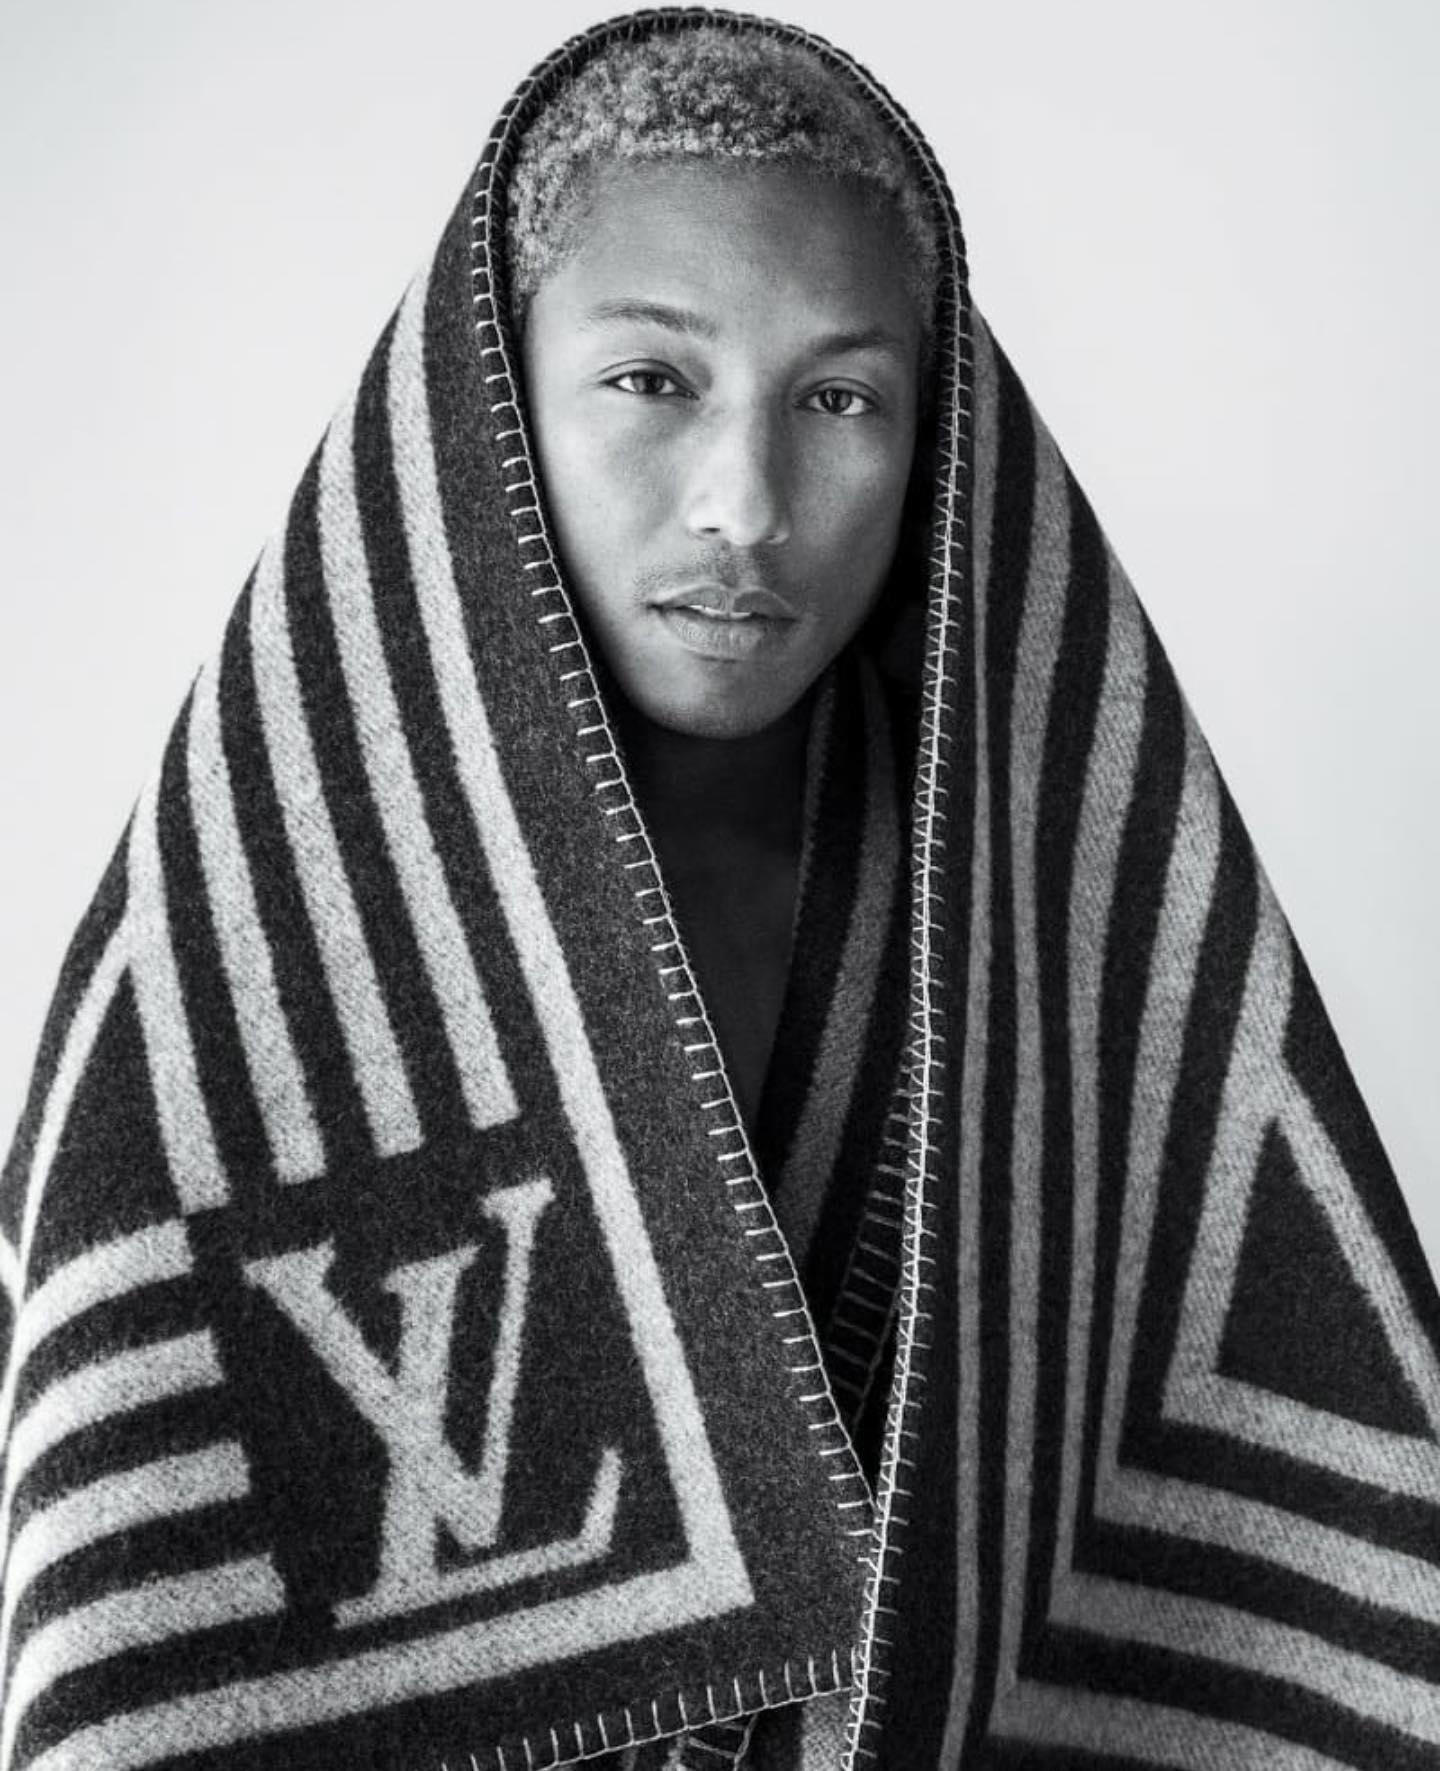 Louis Vuitton is delighted to welcome Pharrell Williams as its new Men’s Creative Director